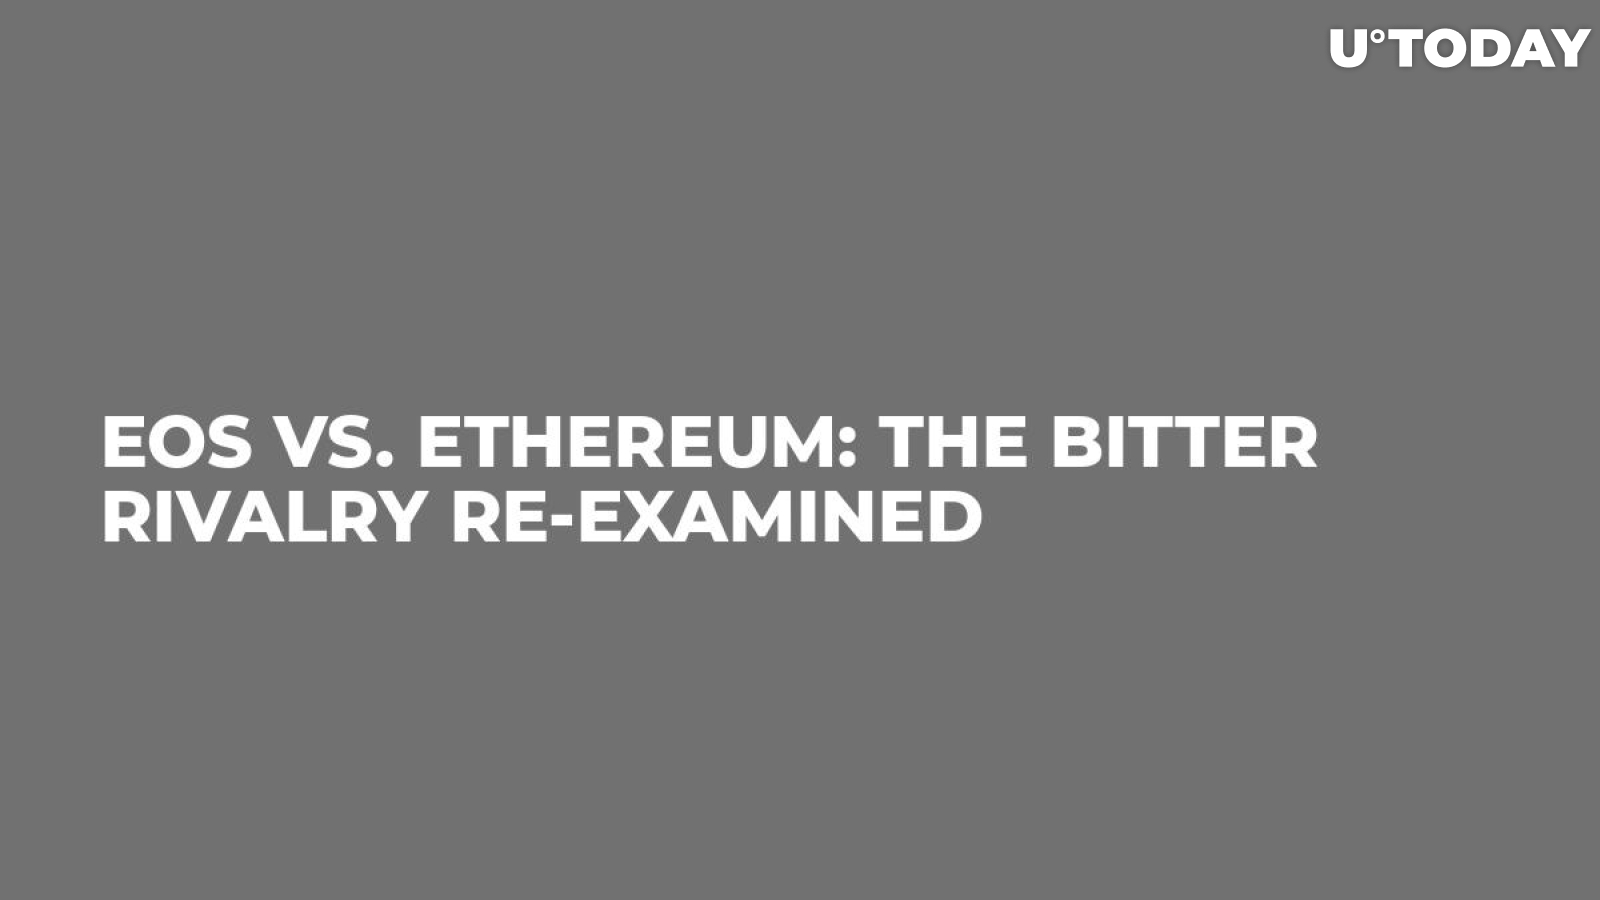 EOS vs. Ethereum: The Bitter Rivalry Re-Examined